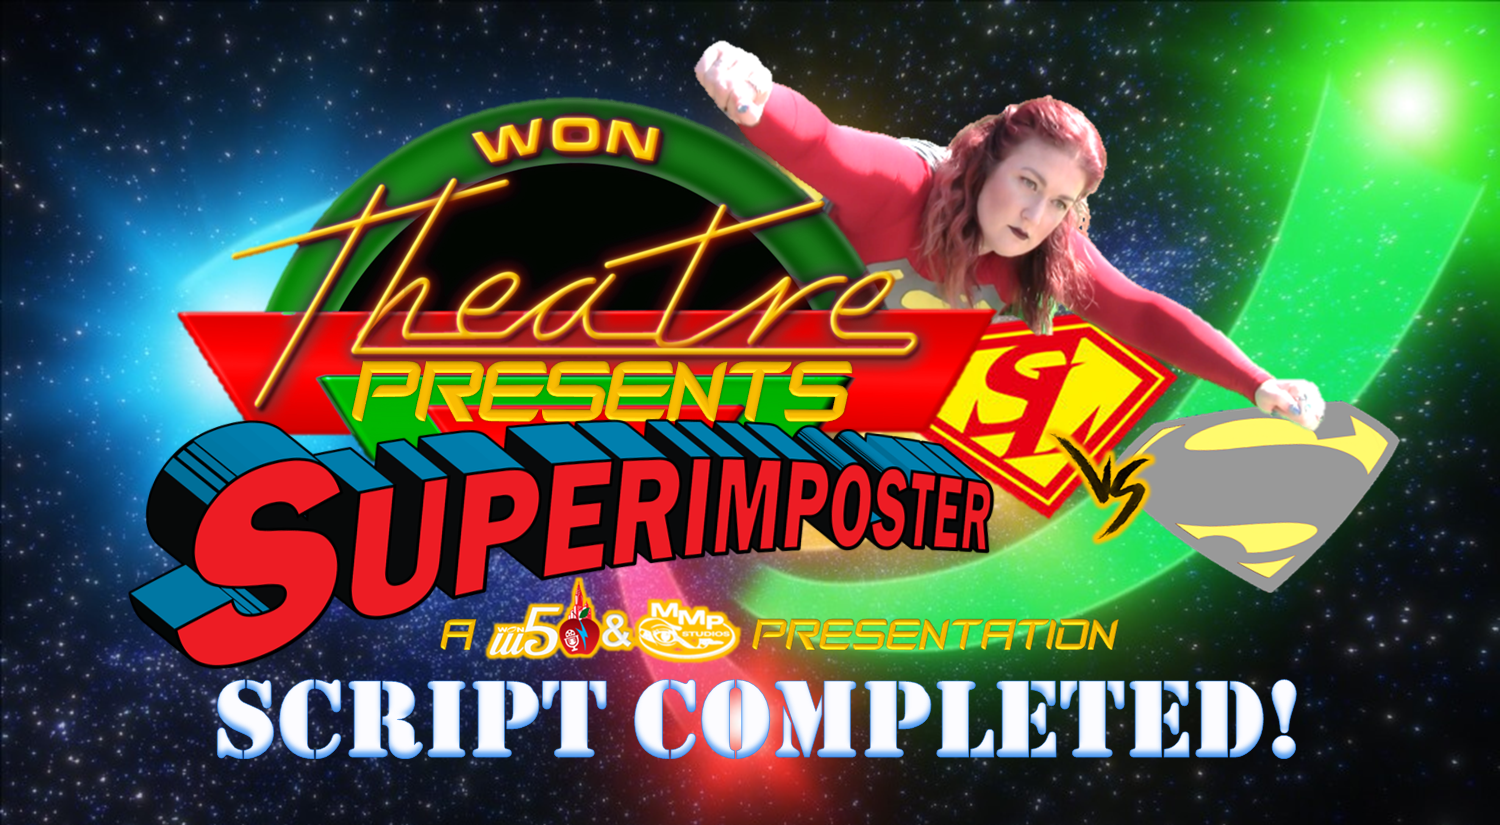 superimposternewscriptcompleted.png